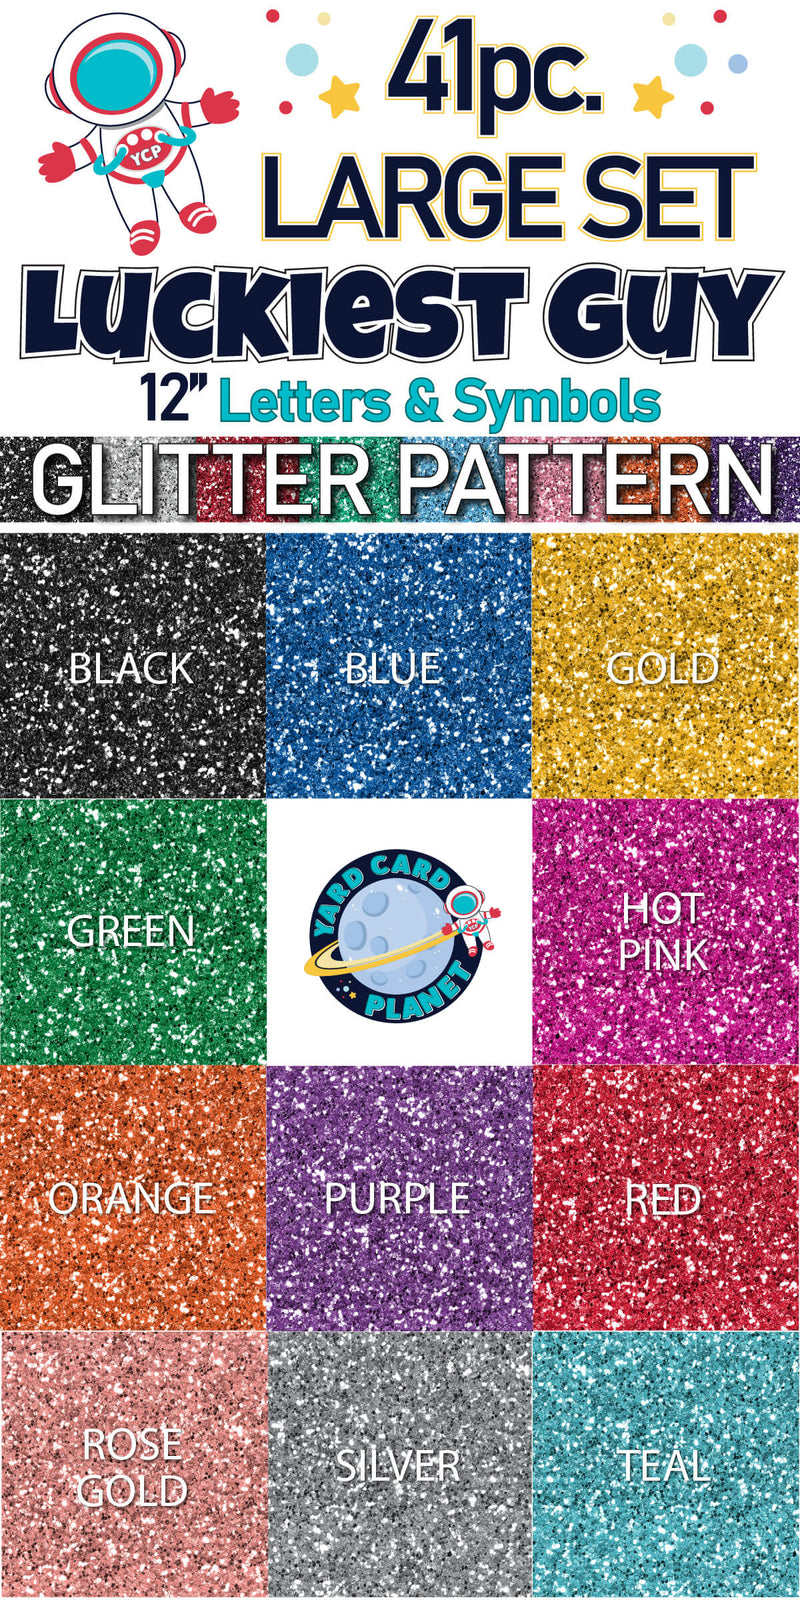 12" Luckiest Guy 41 pc. Letters and Symbols Set in Glitter Pattern Color Options